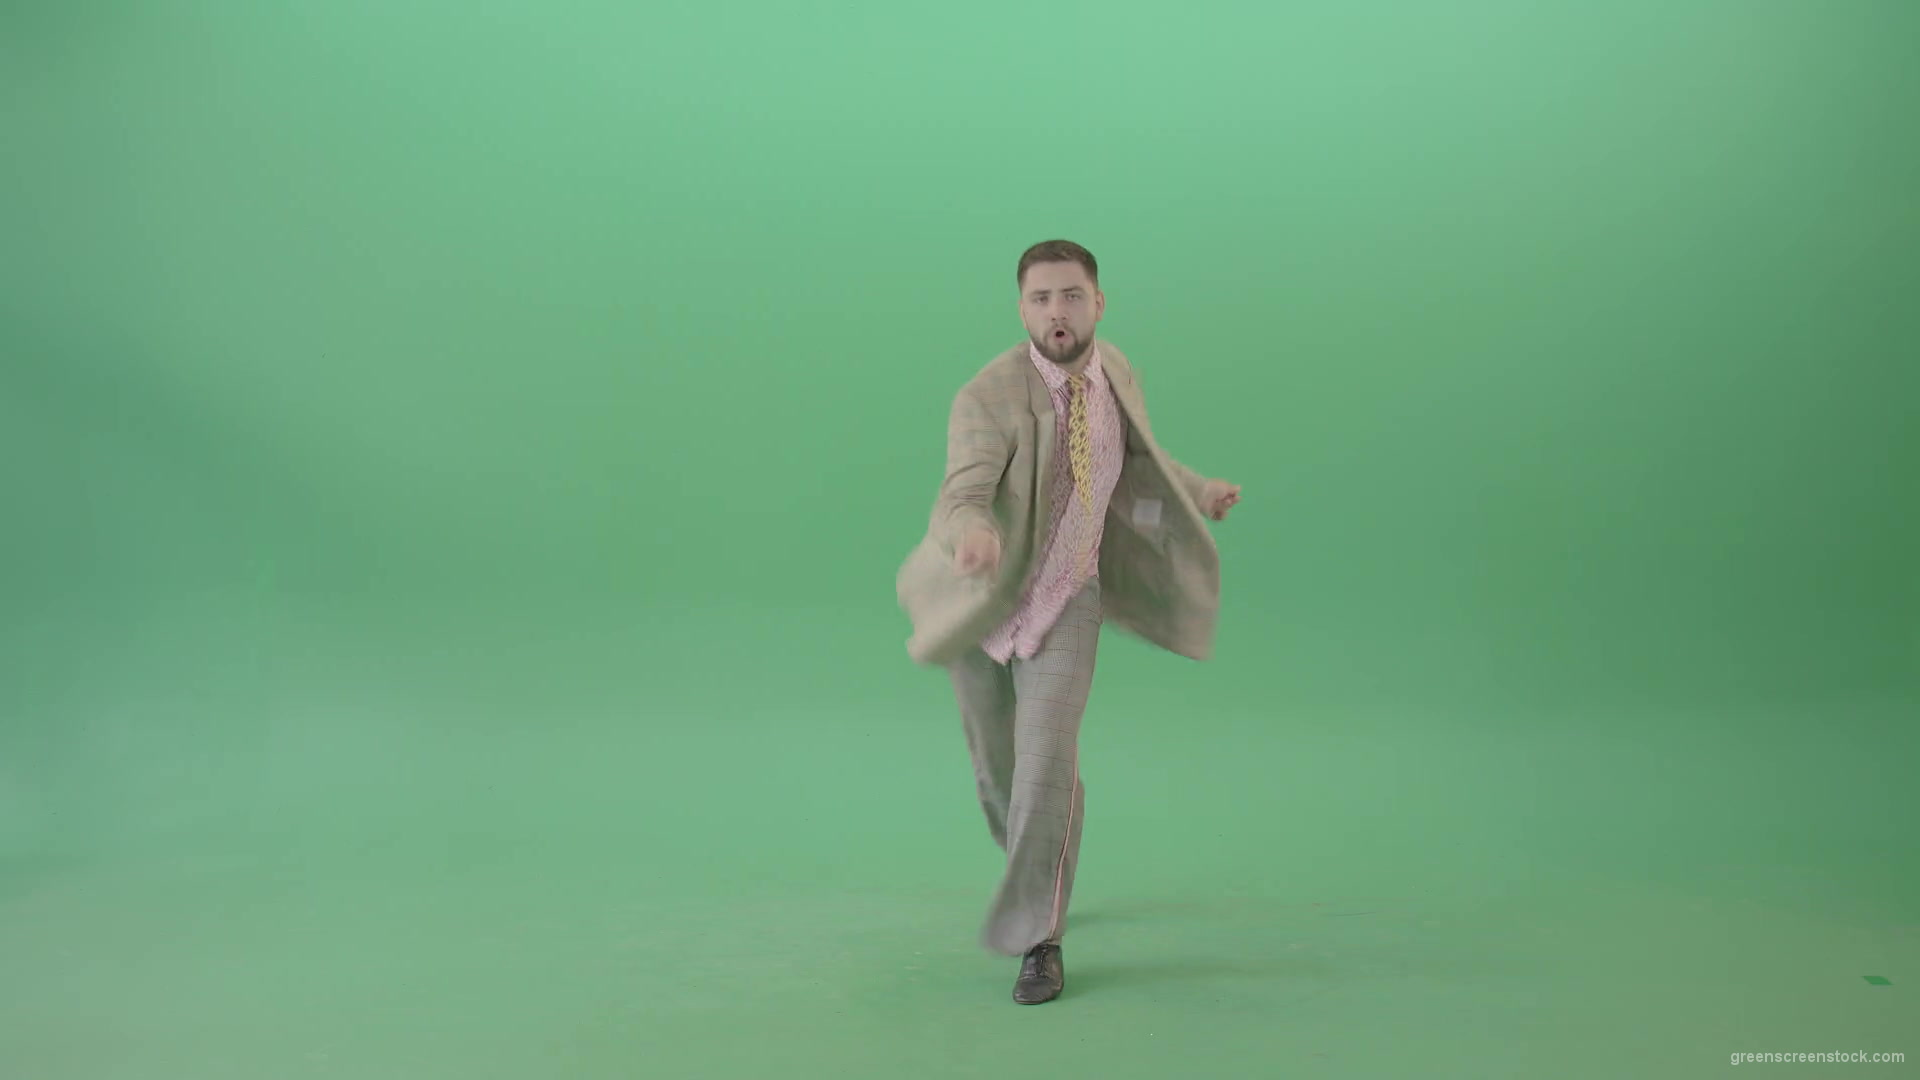 Man-dancing-shuffle-jazz-swing-Boogie-woogie-and-jumping-isolated-over-Green-Screen-4K-Video-Footage-1920_006 Green Screen Stock